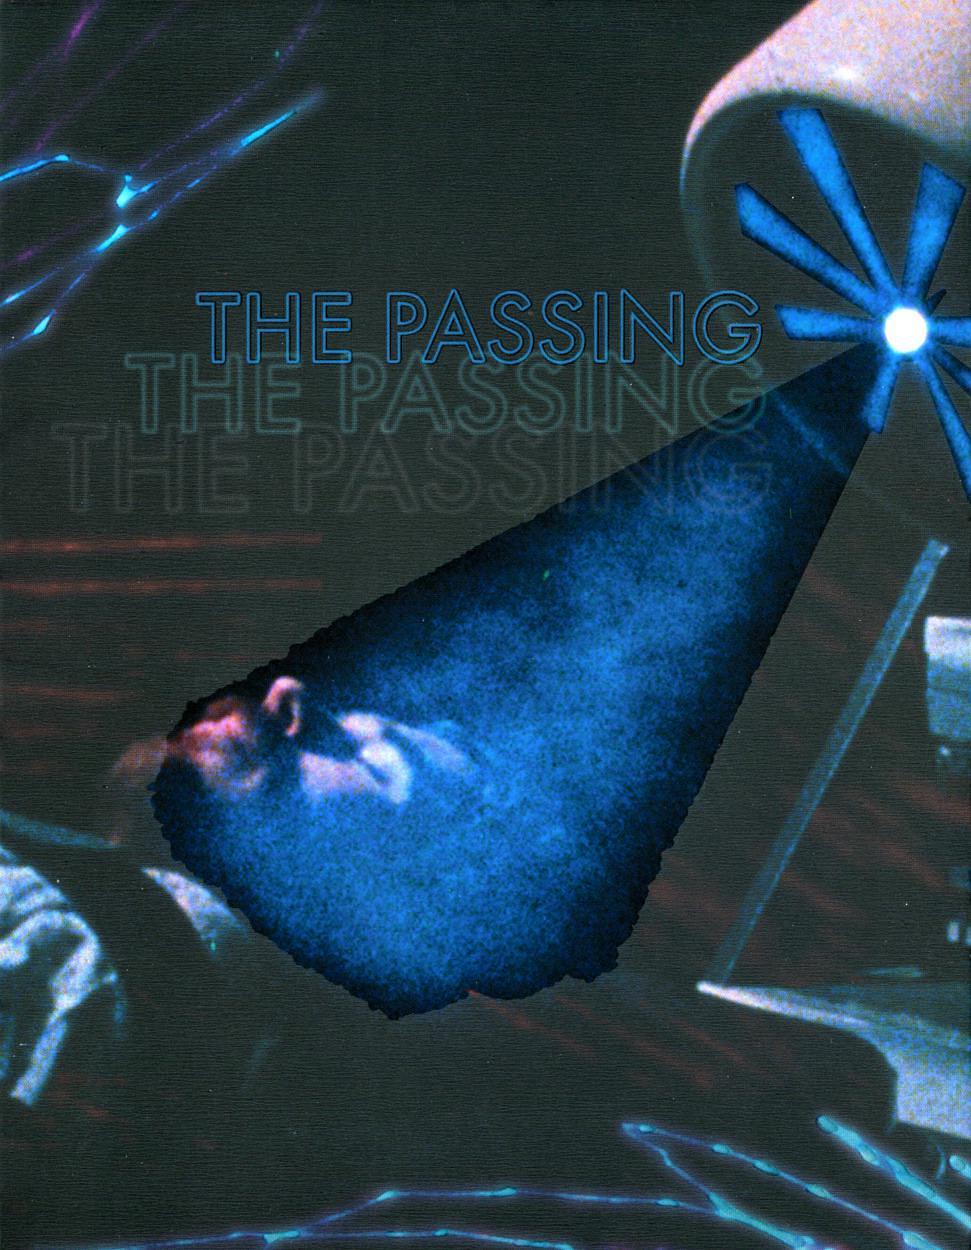  The.Passing.1983.1080p.BluRay.x264.DTS-FGT 8.70GB-1.png